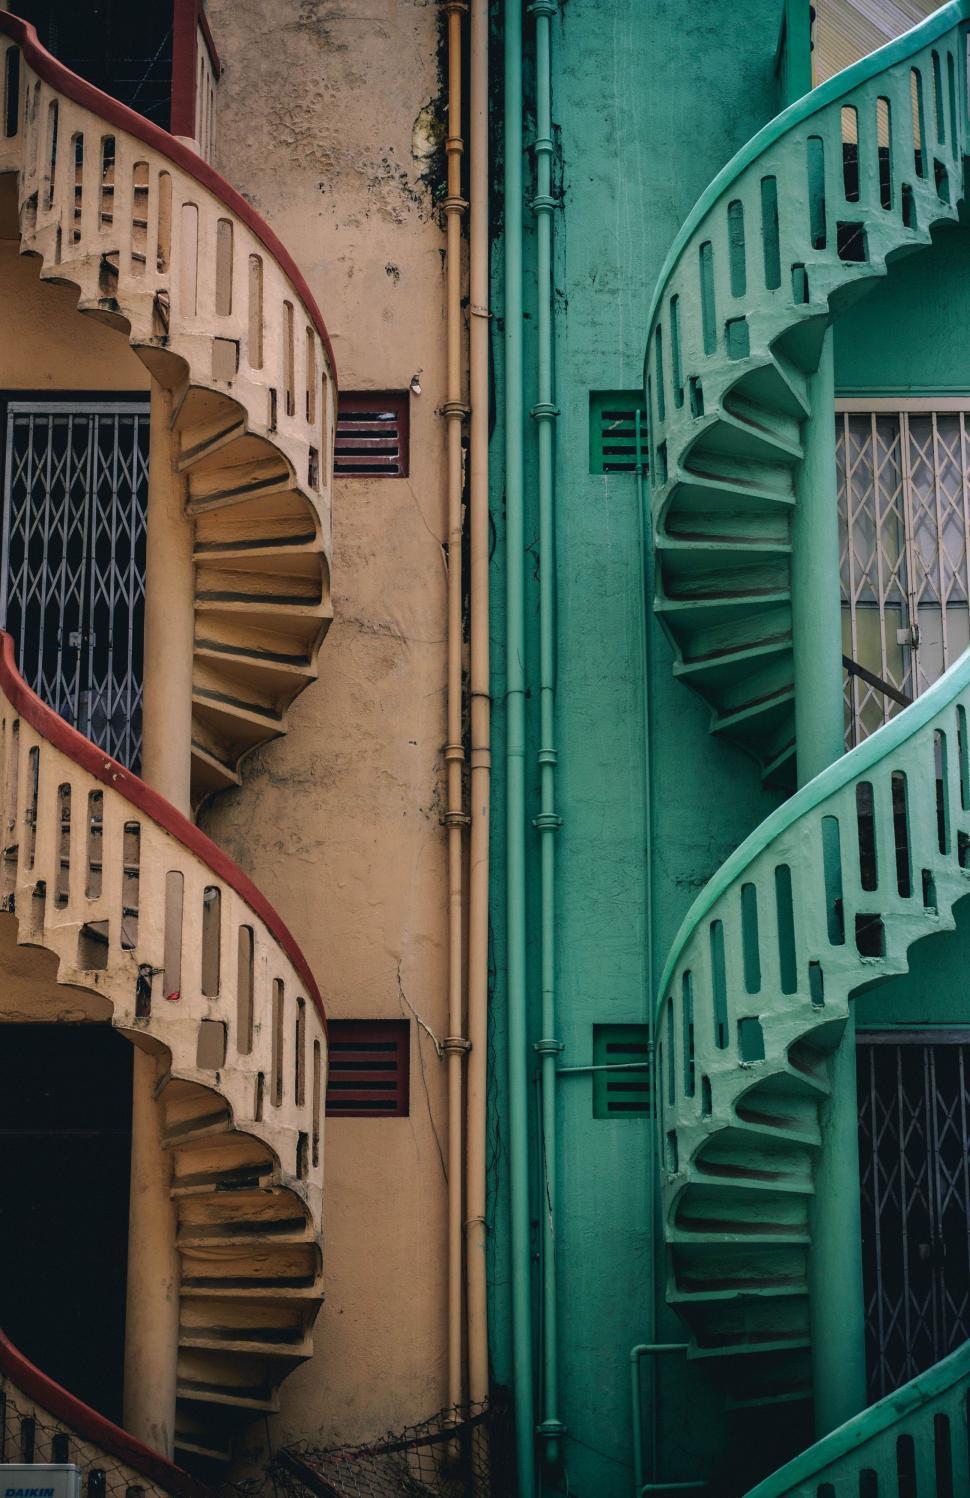 Free Image of Spiral Staircase Next to Old Building 